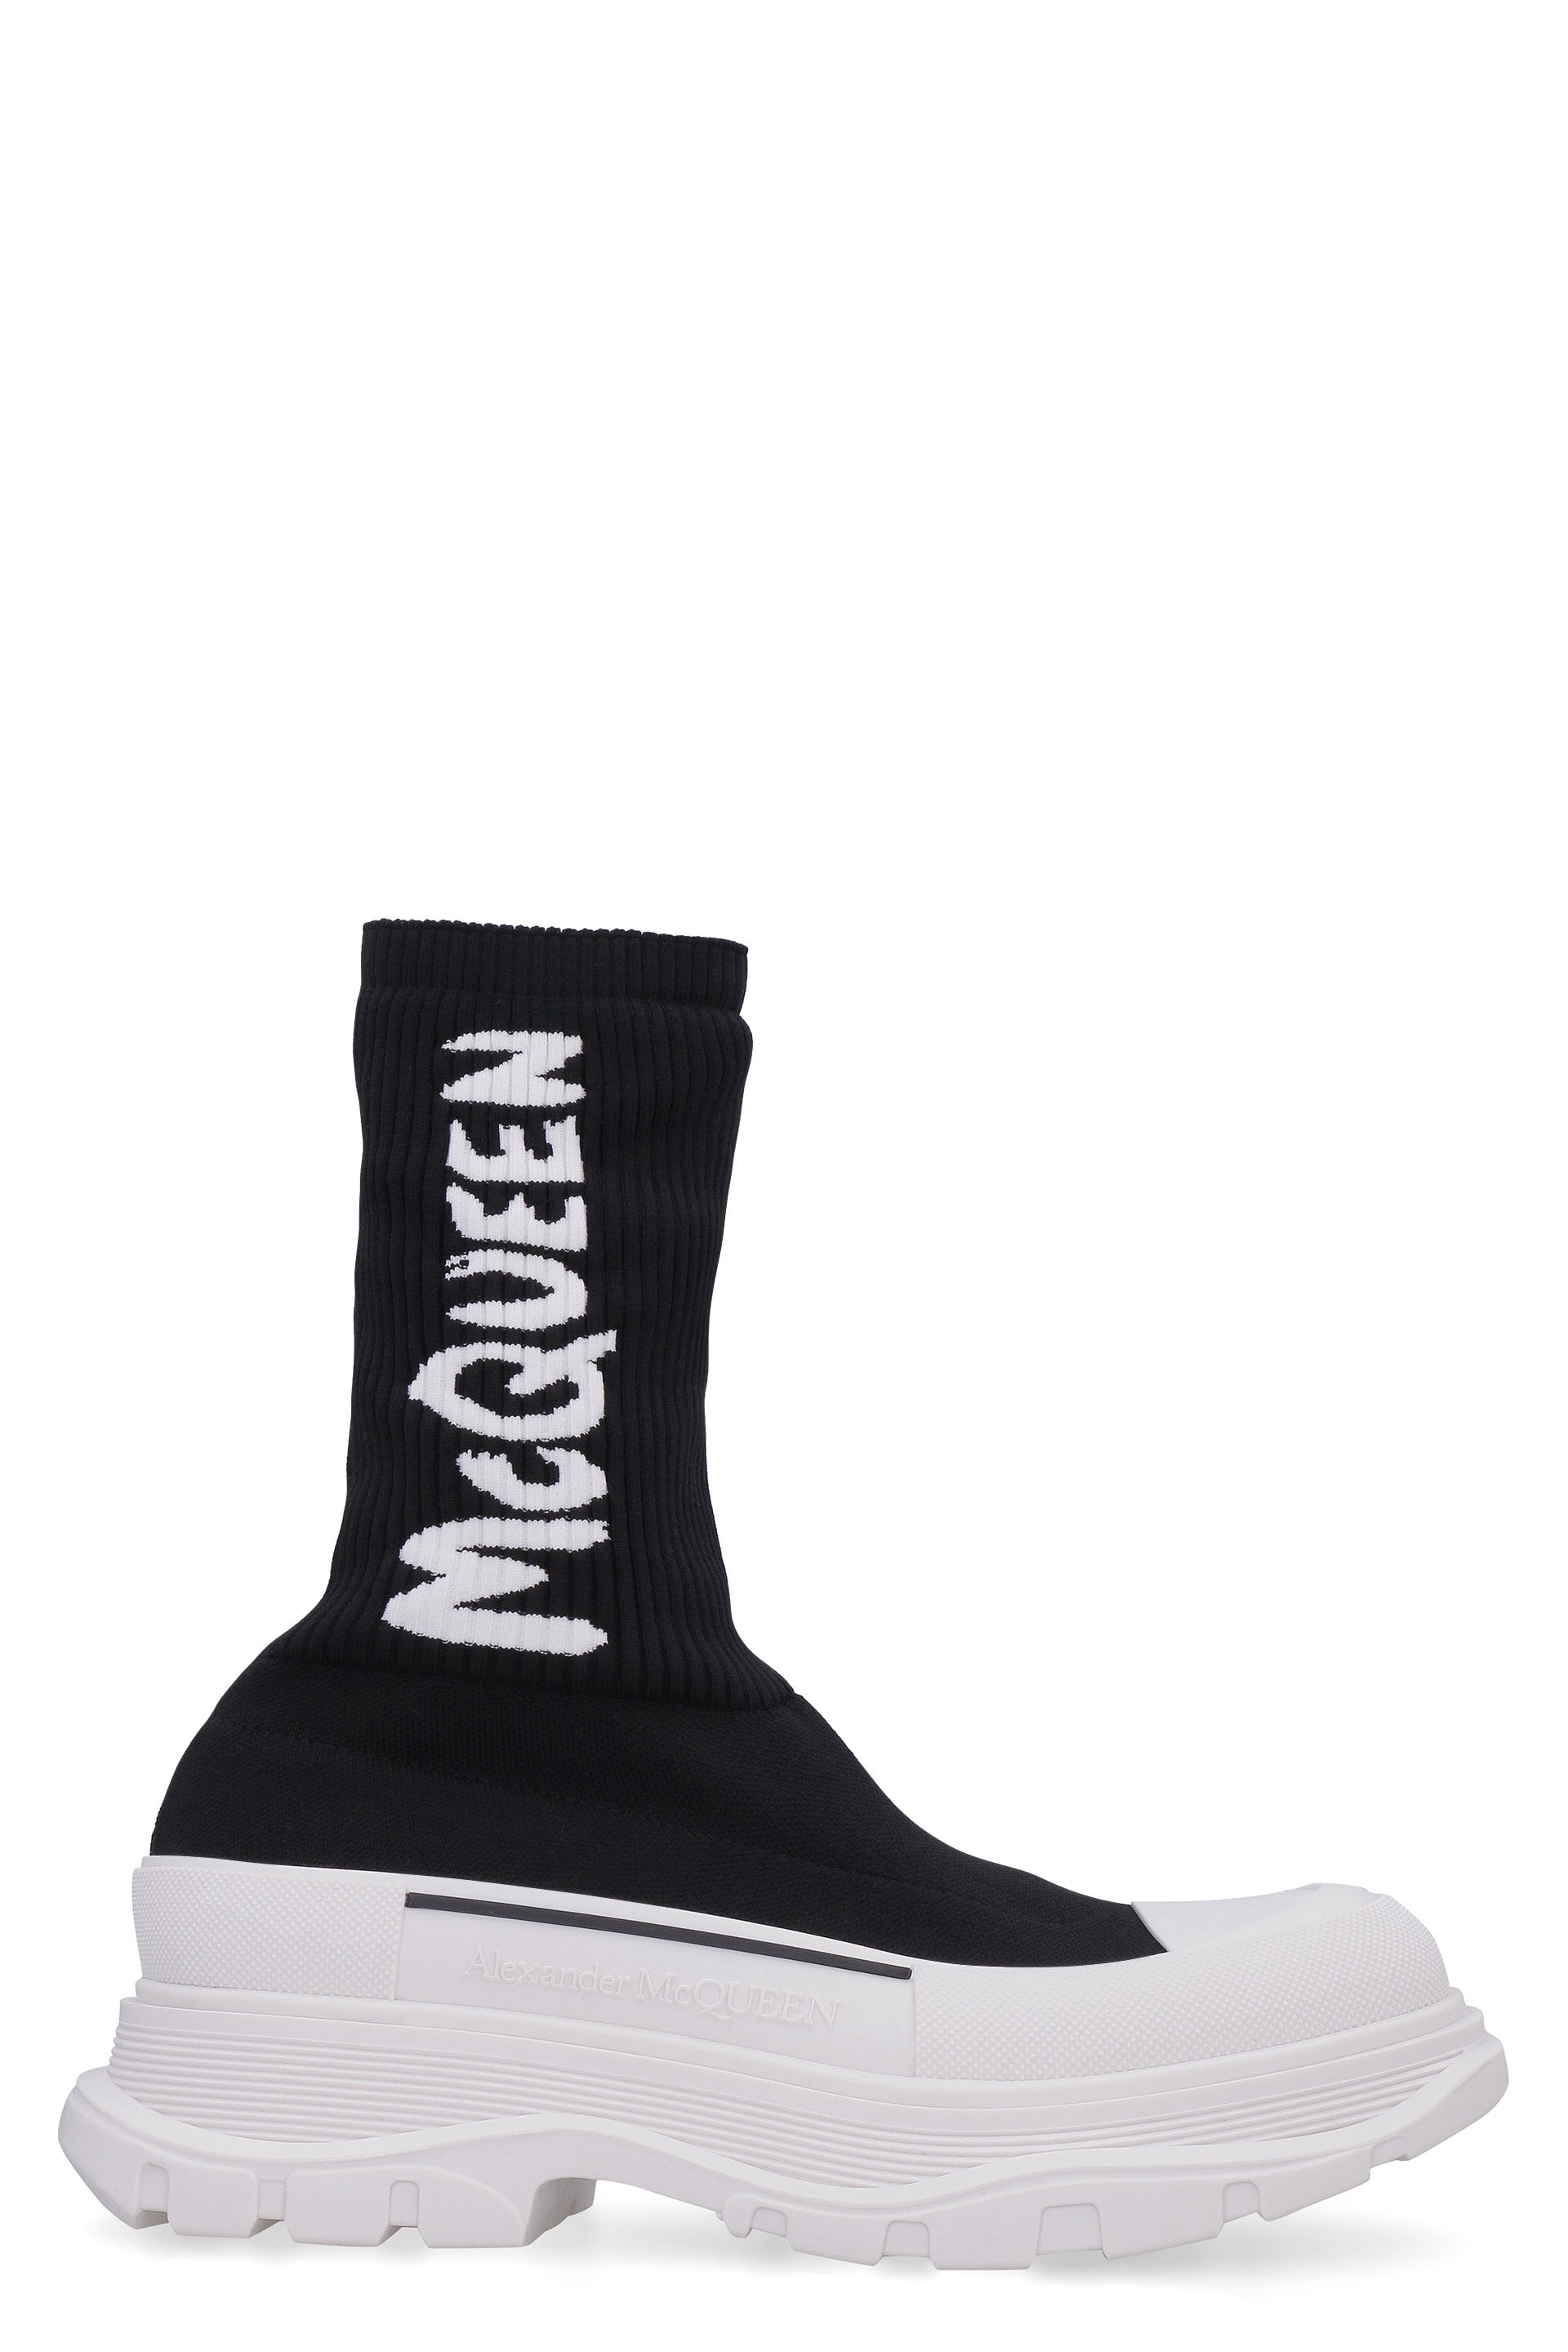 Tread Slick knitted boots-Alexander McQueen-OUTLET-SALE-35-ARCHIVIST